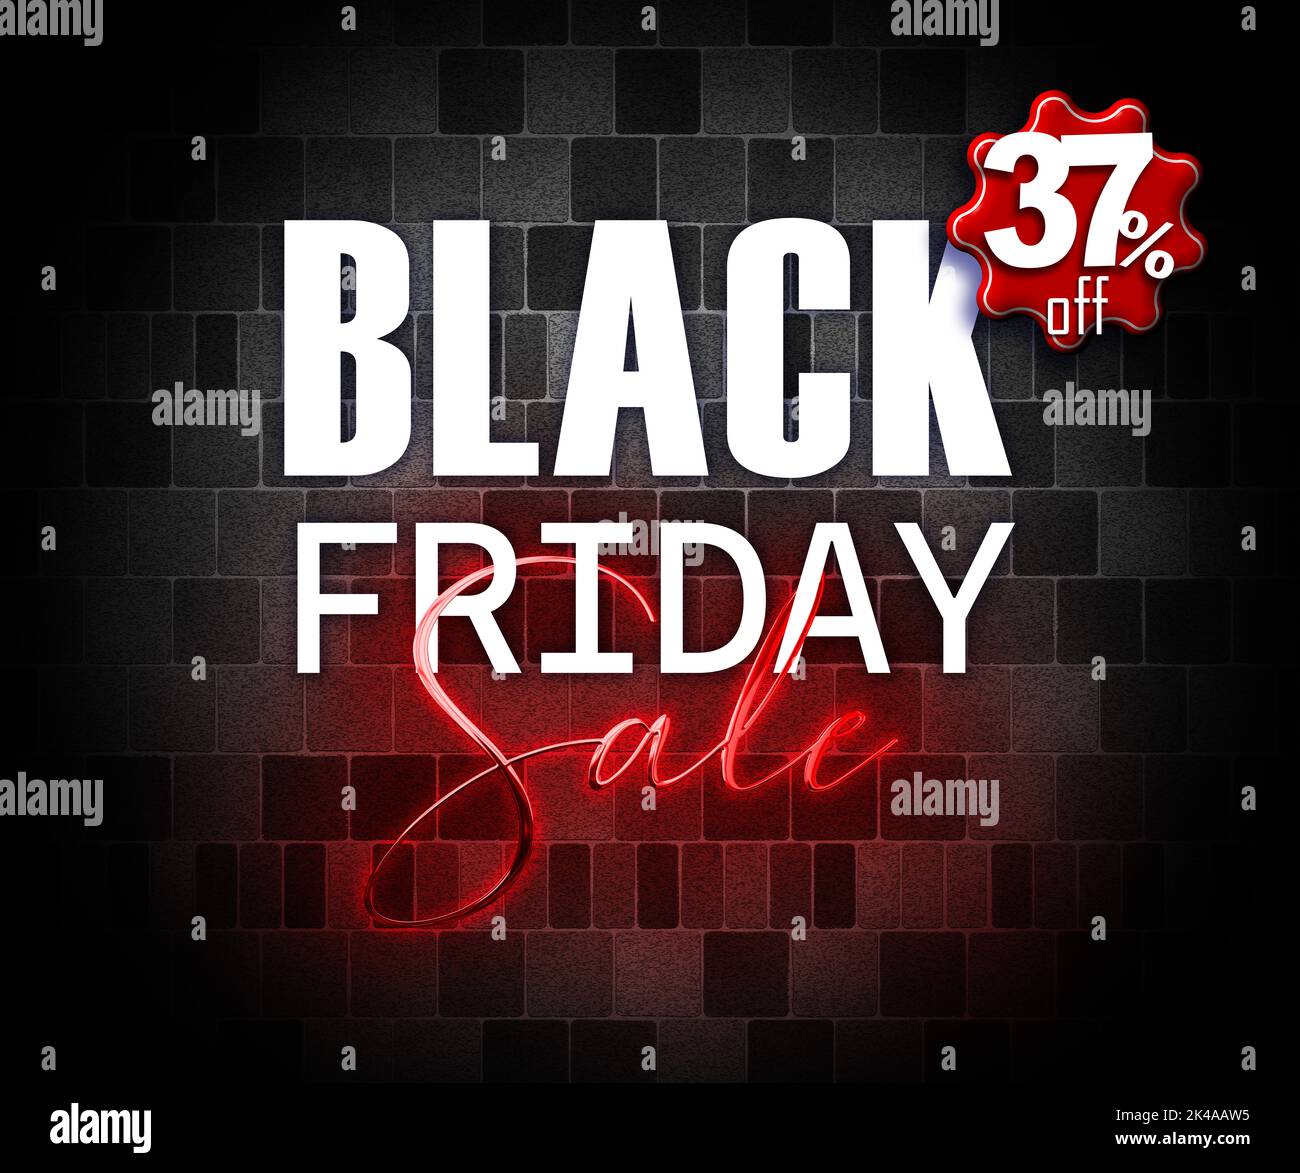 illustration with 3d elements black friday promotion banner 37 percent off sales increase Stock Photo